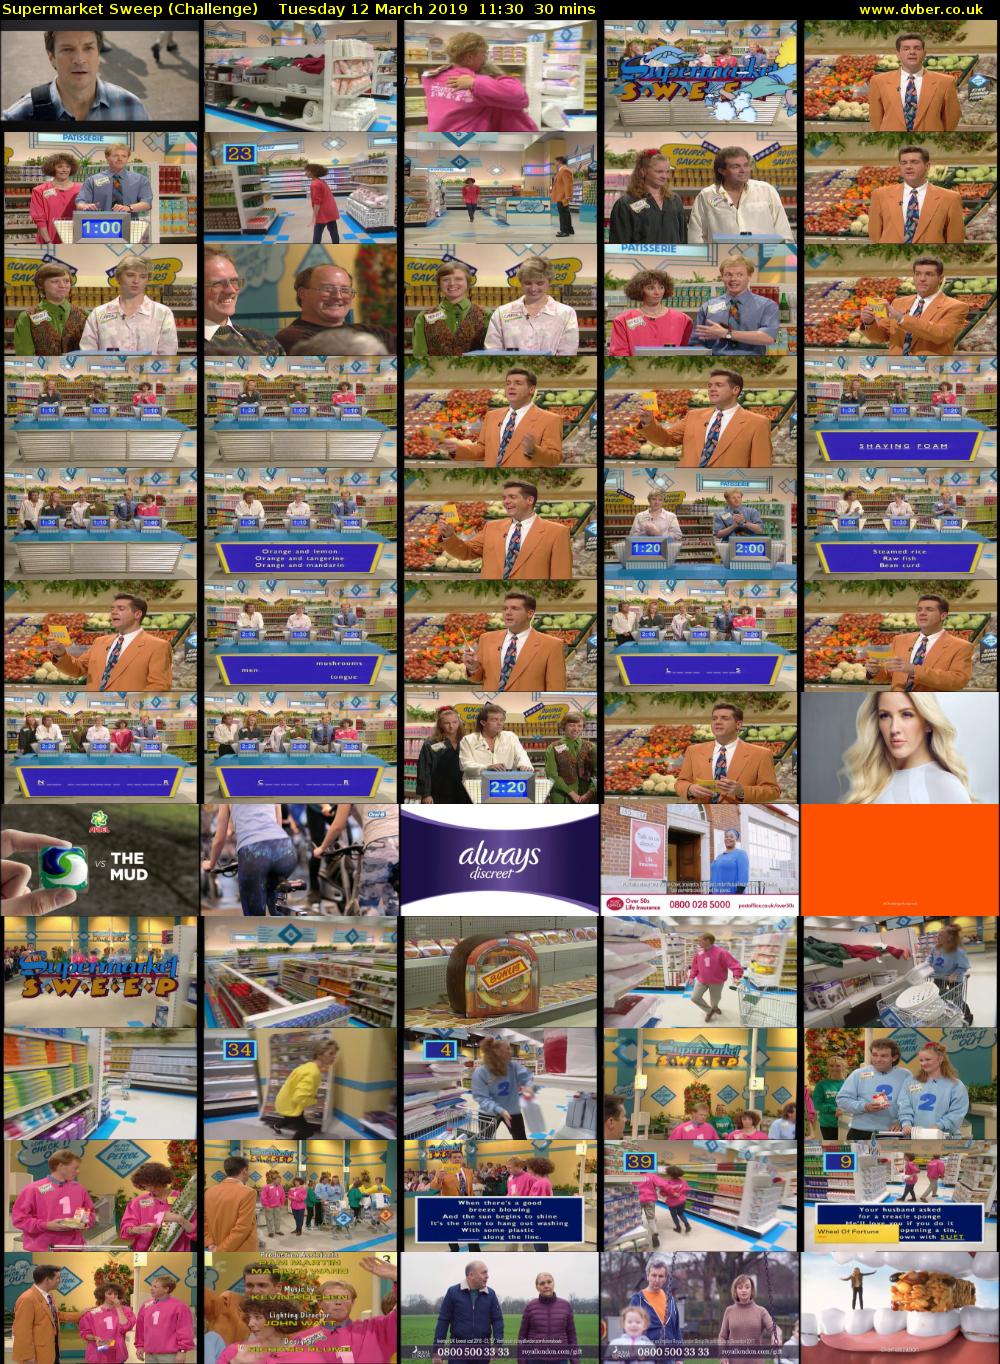 Supermarket Sweep (Challenge) Tuesday 12 March 2019 11:30 - 12:00